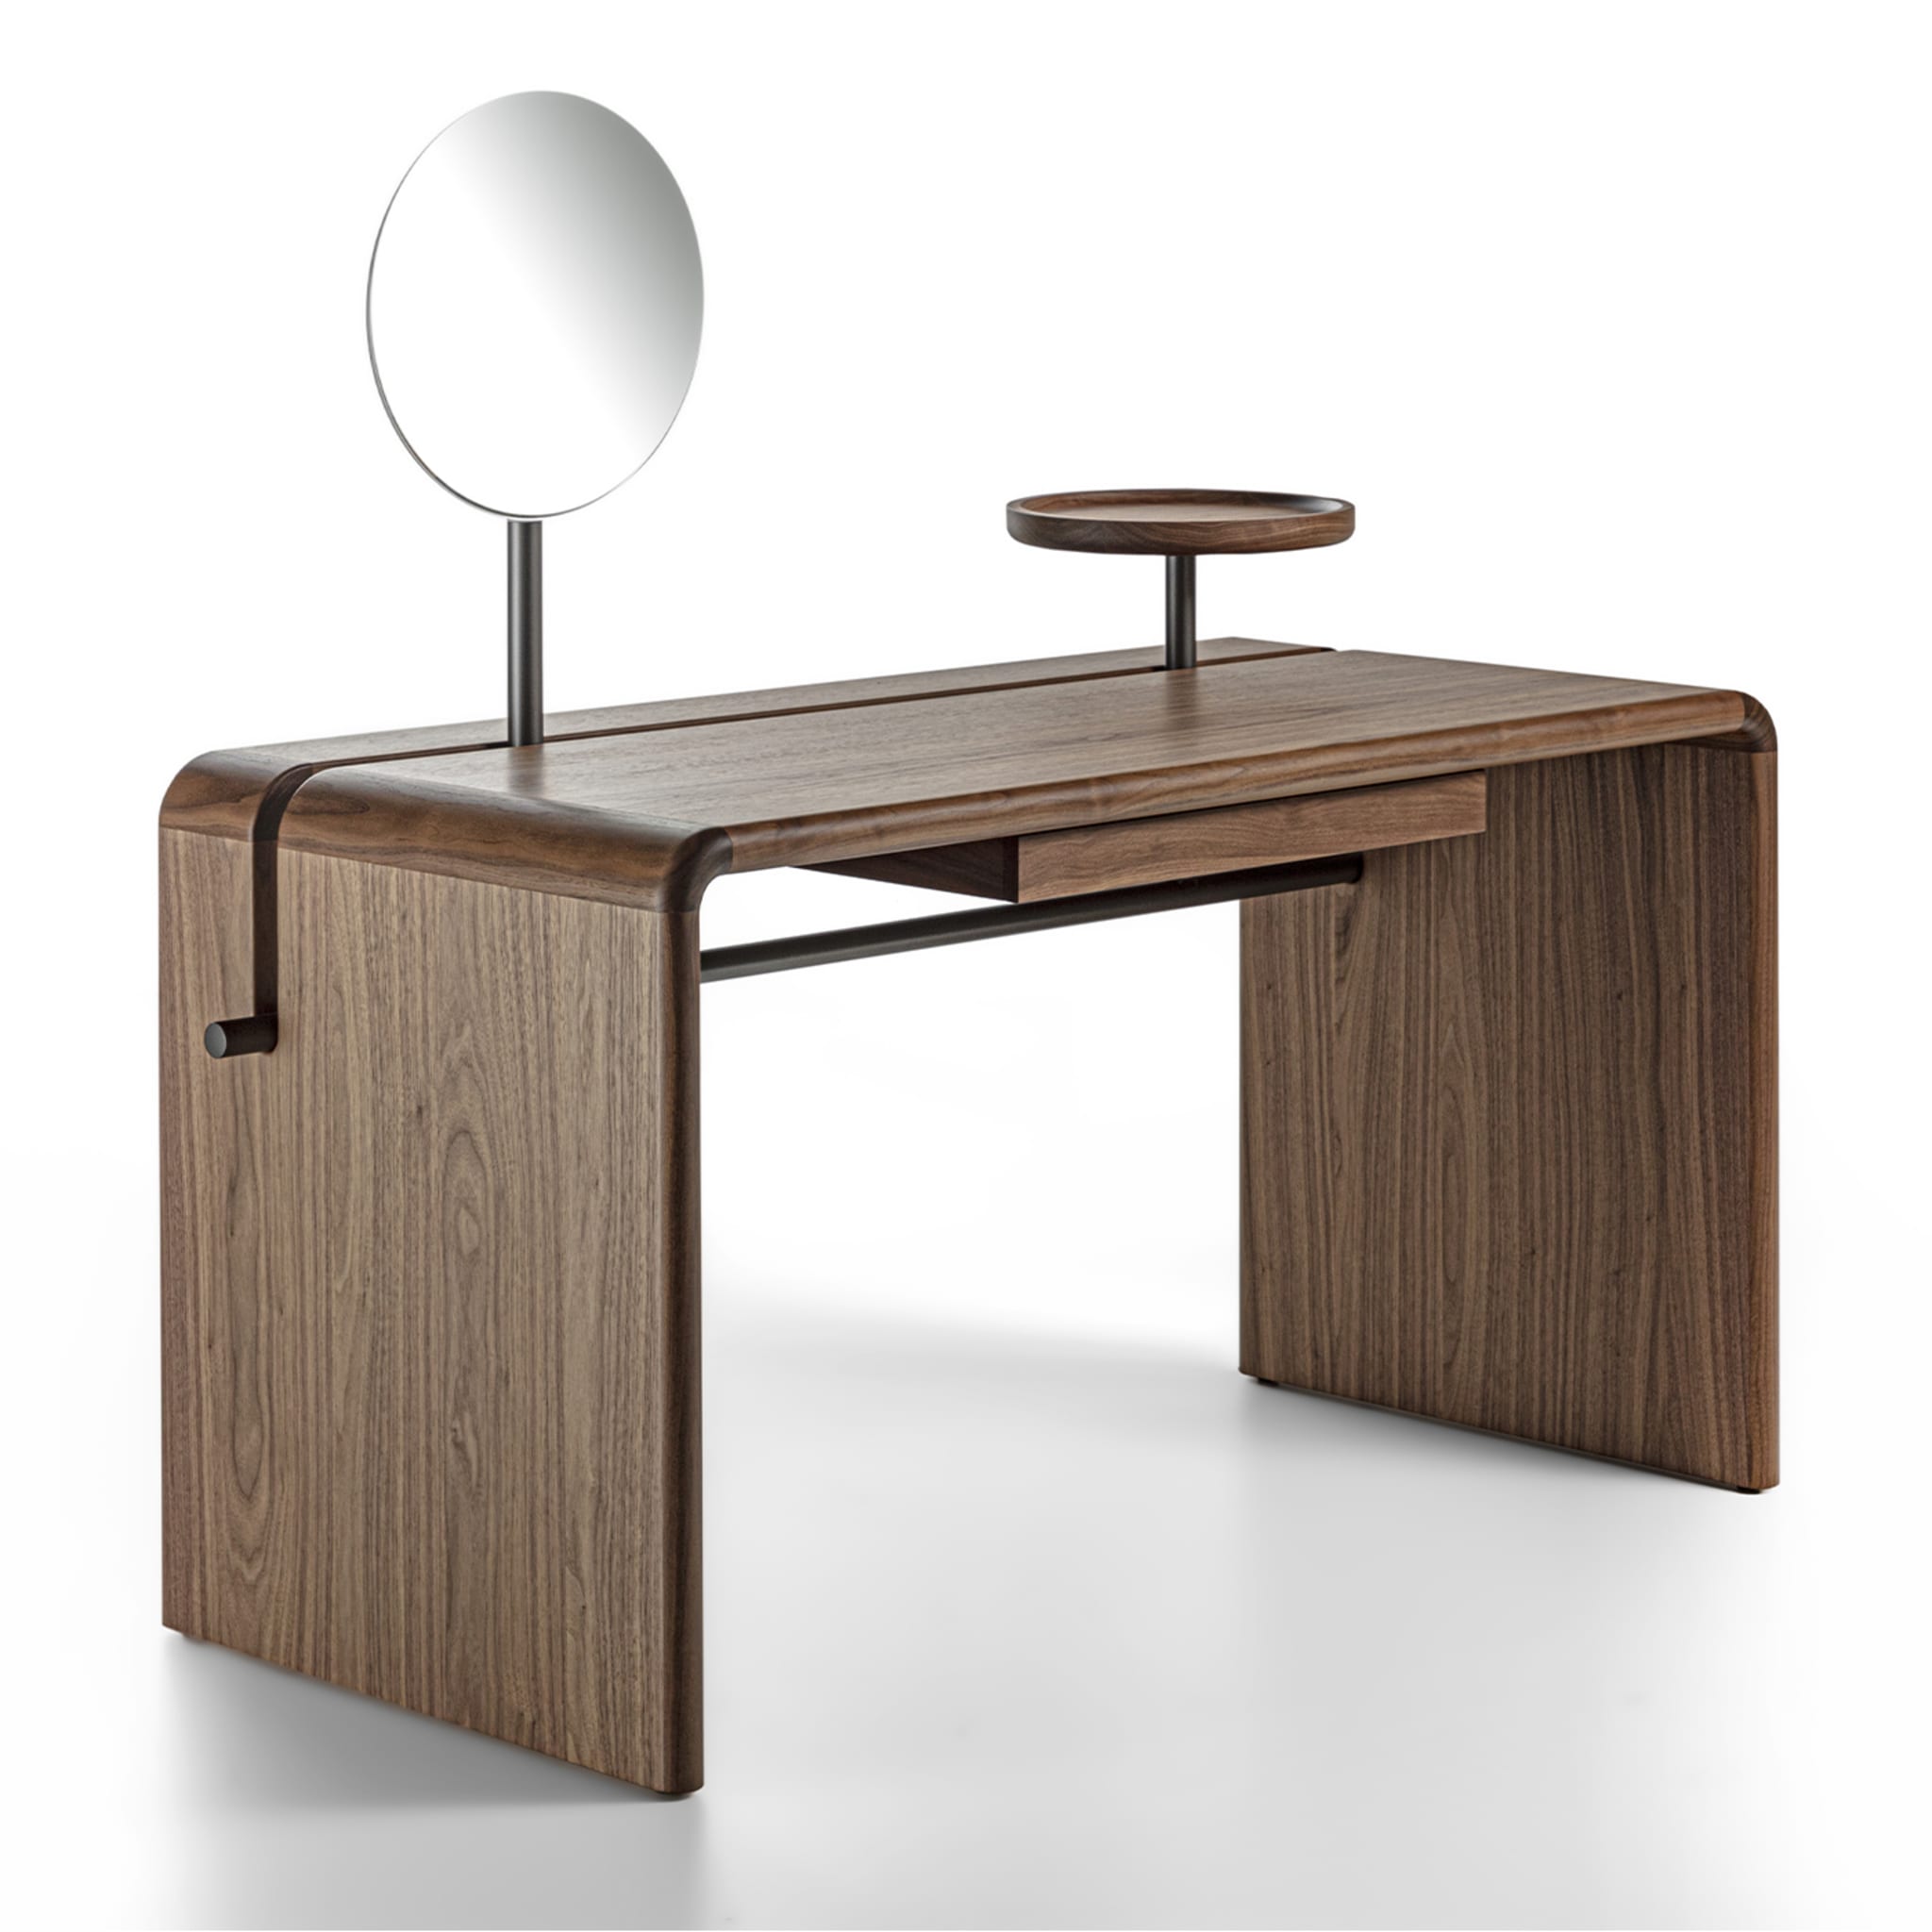 Butter Canaletto Vanity Desk with Mirror - Alternative view 4